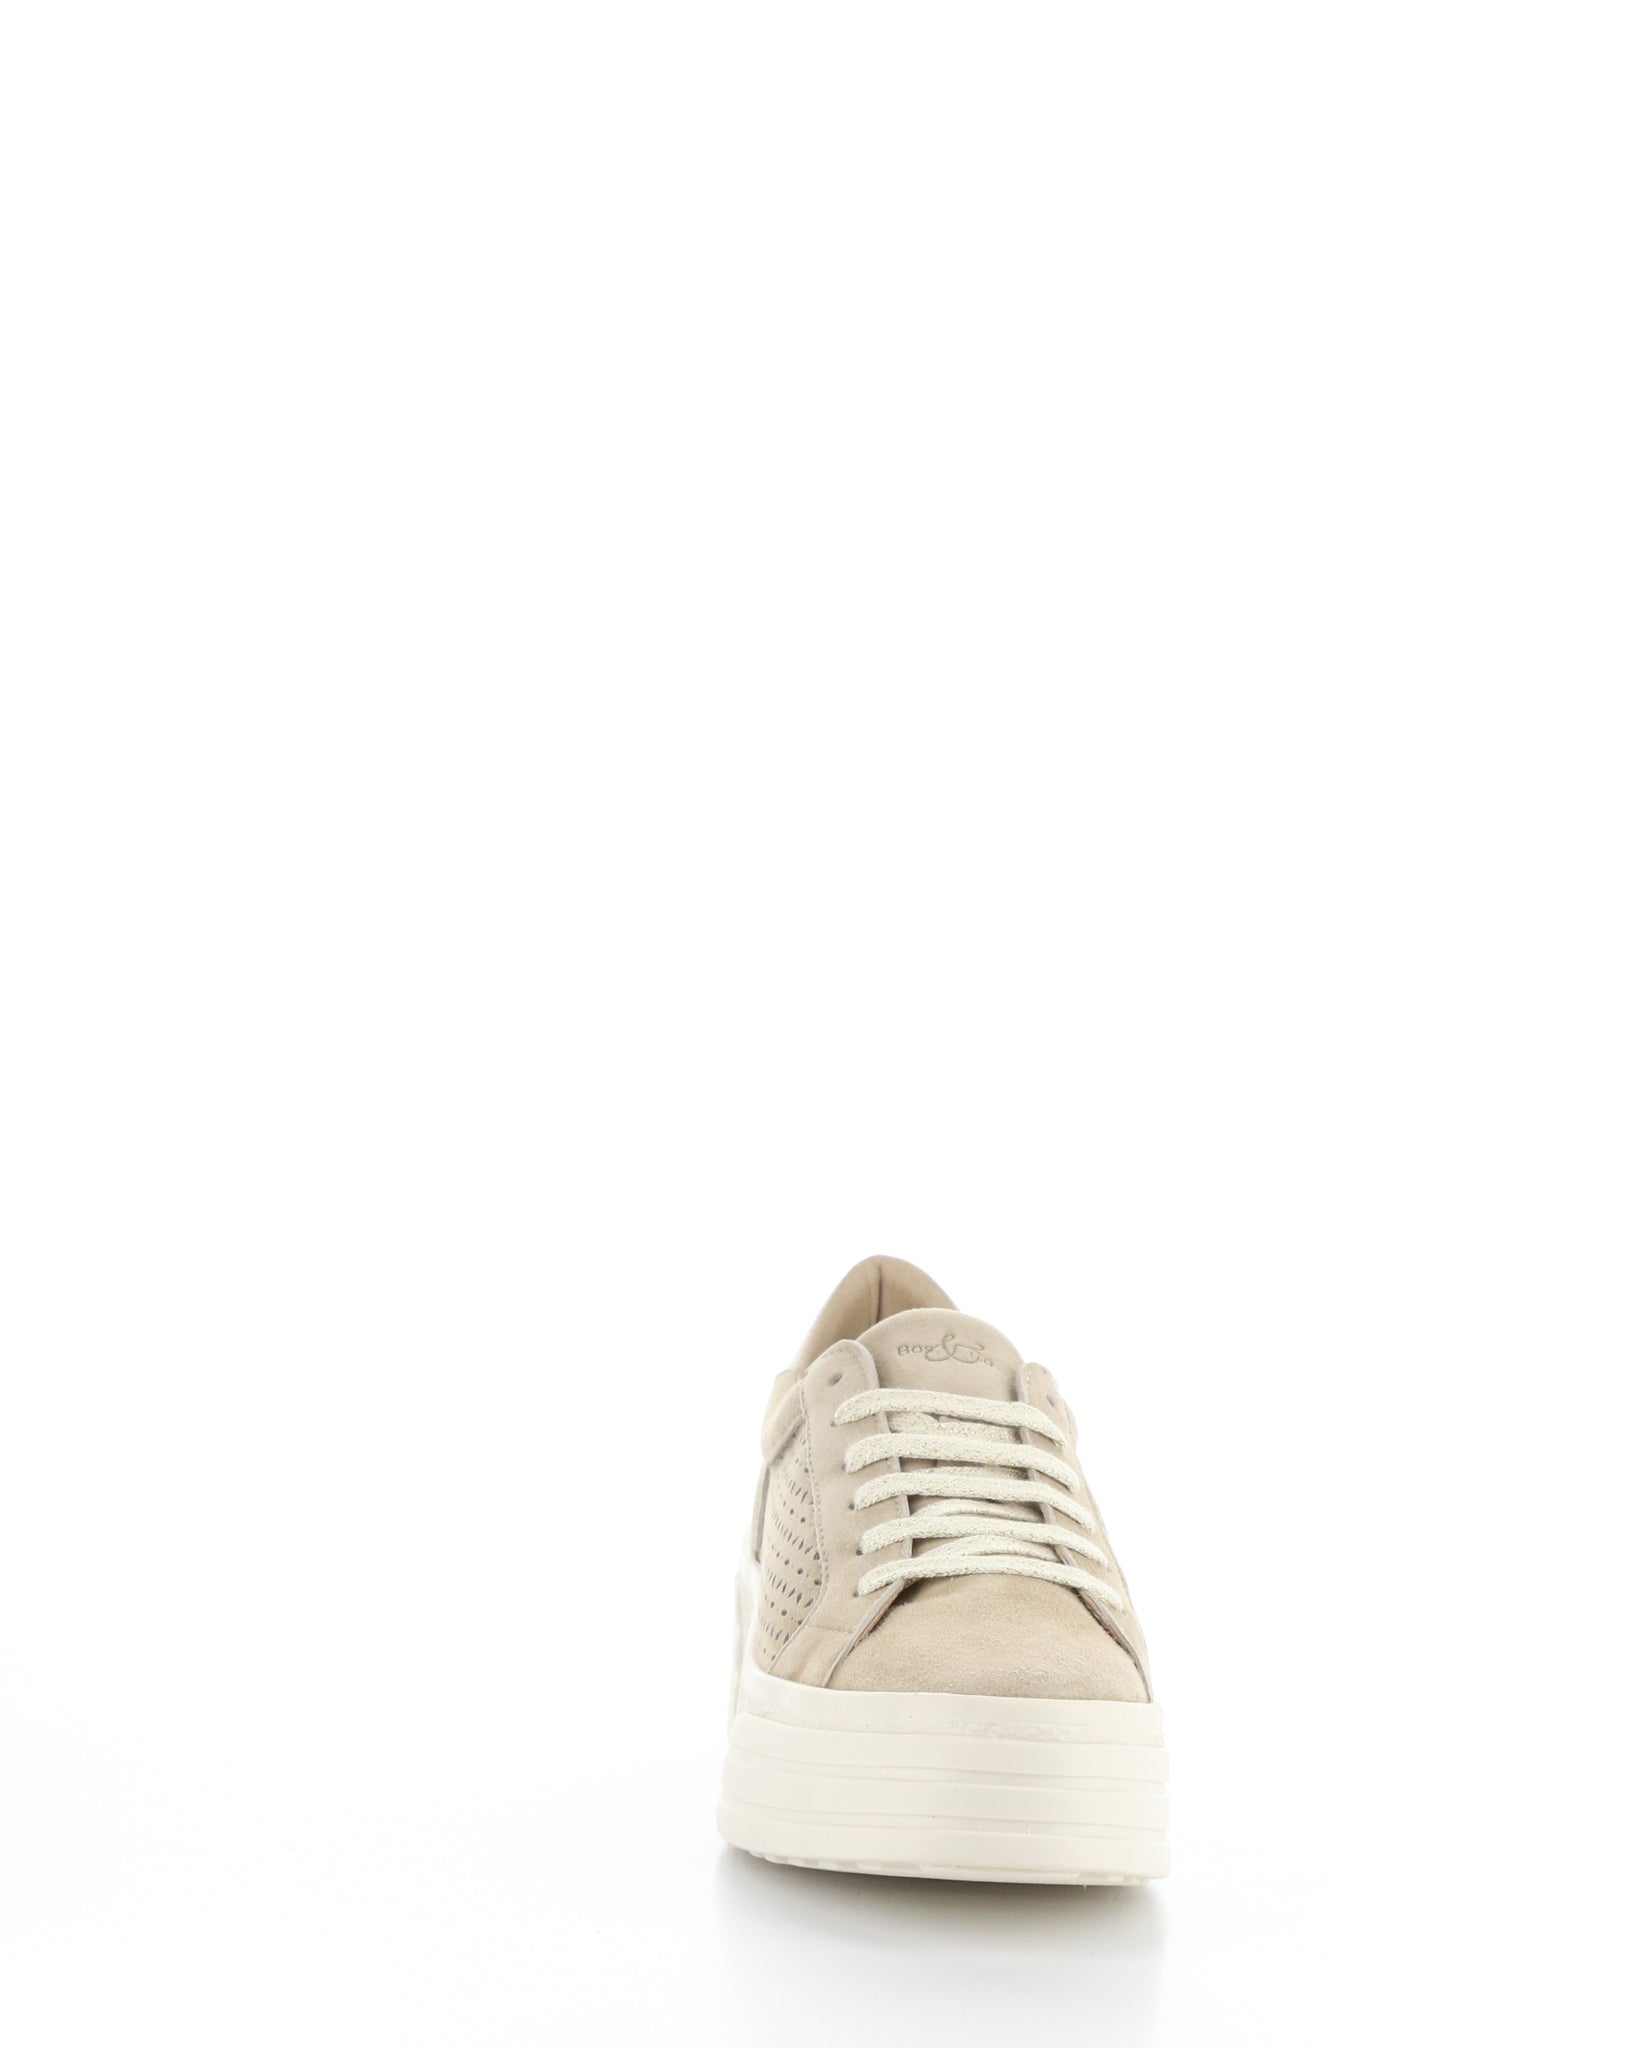 Bos & co "Lotta" Taupe suede sneaker